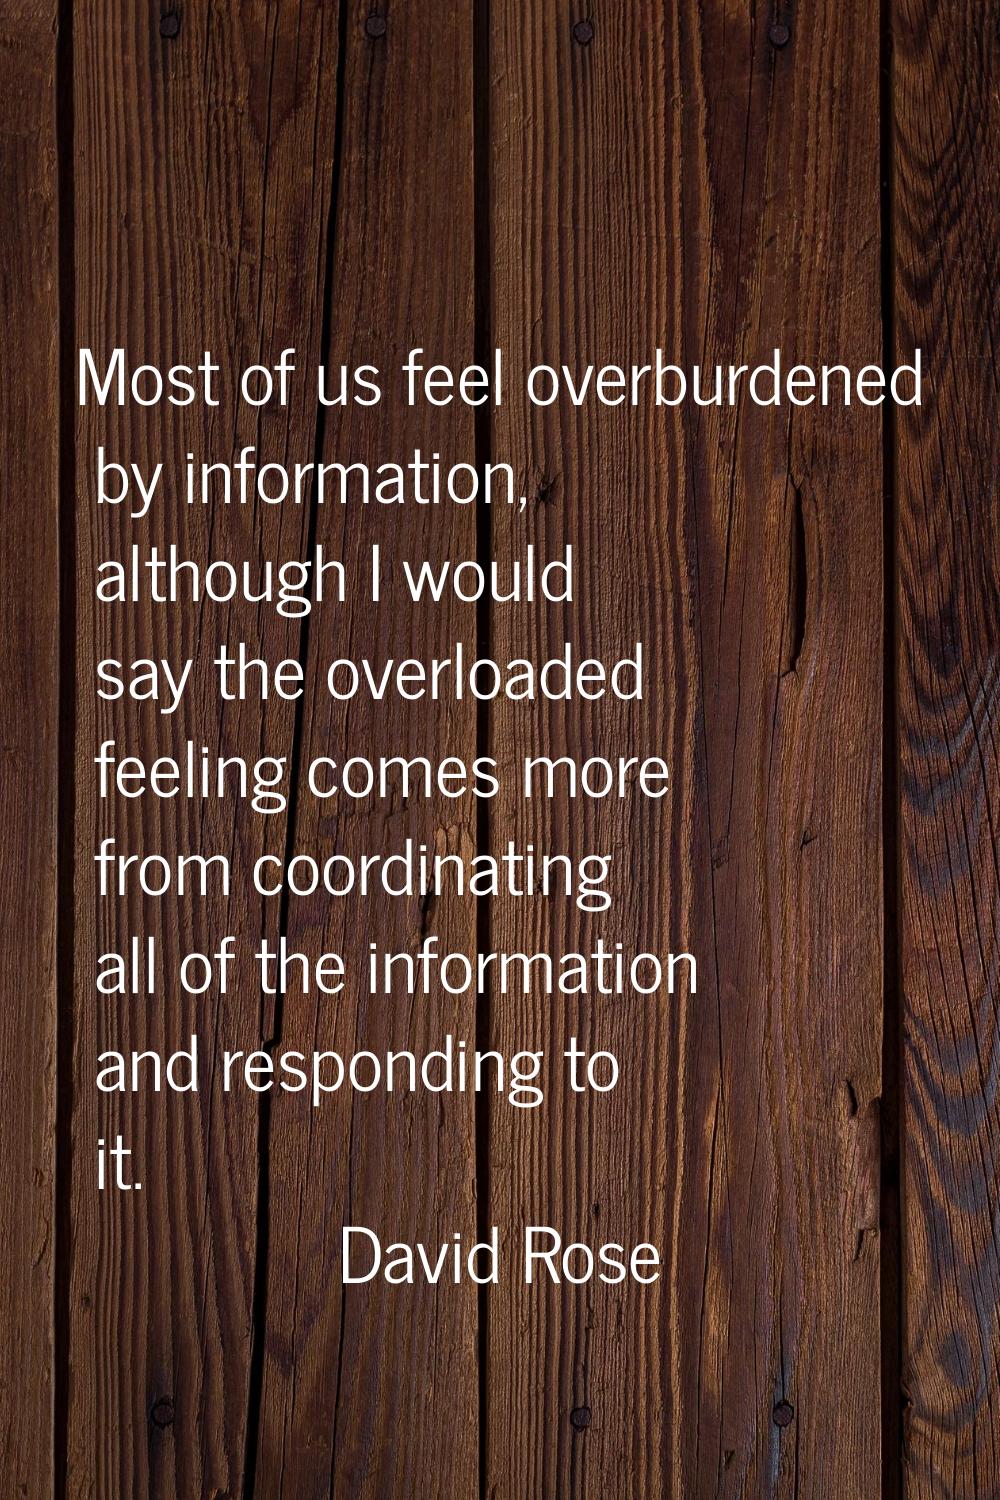 Most of us feel overburdened by information, although I would say the overloaded feeling comes more